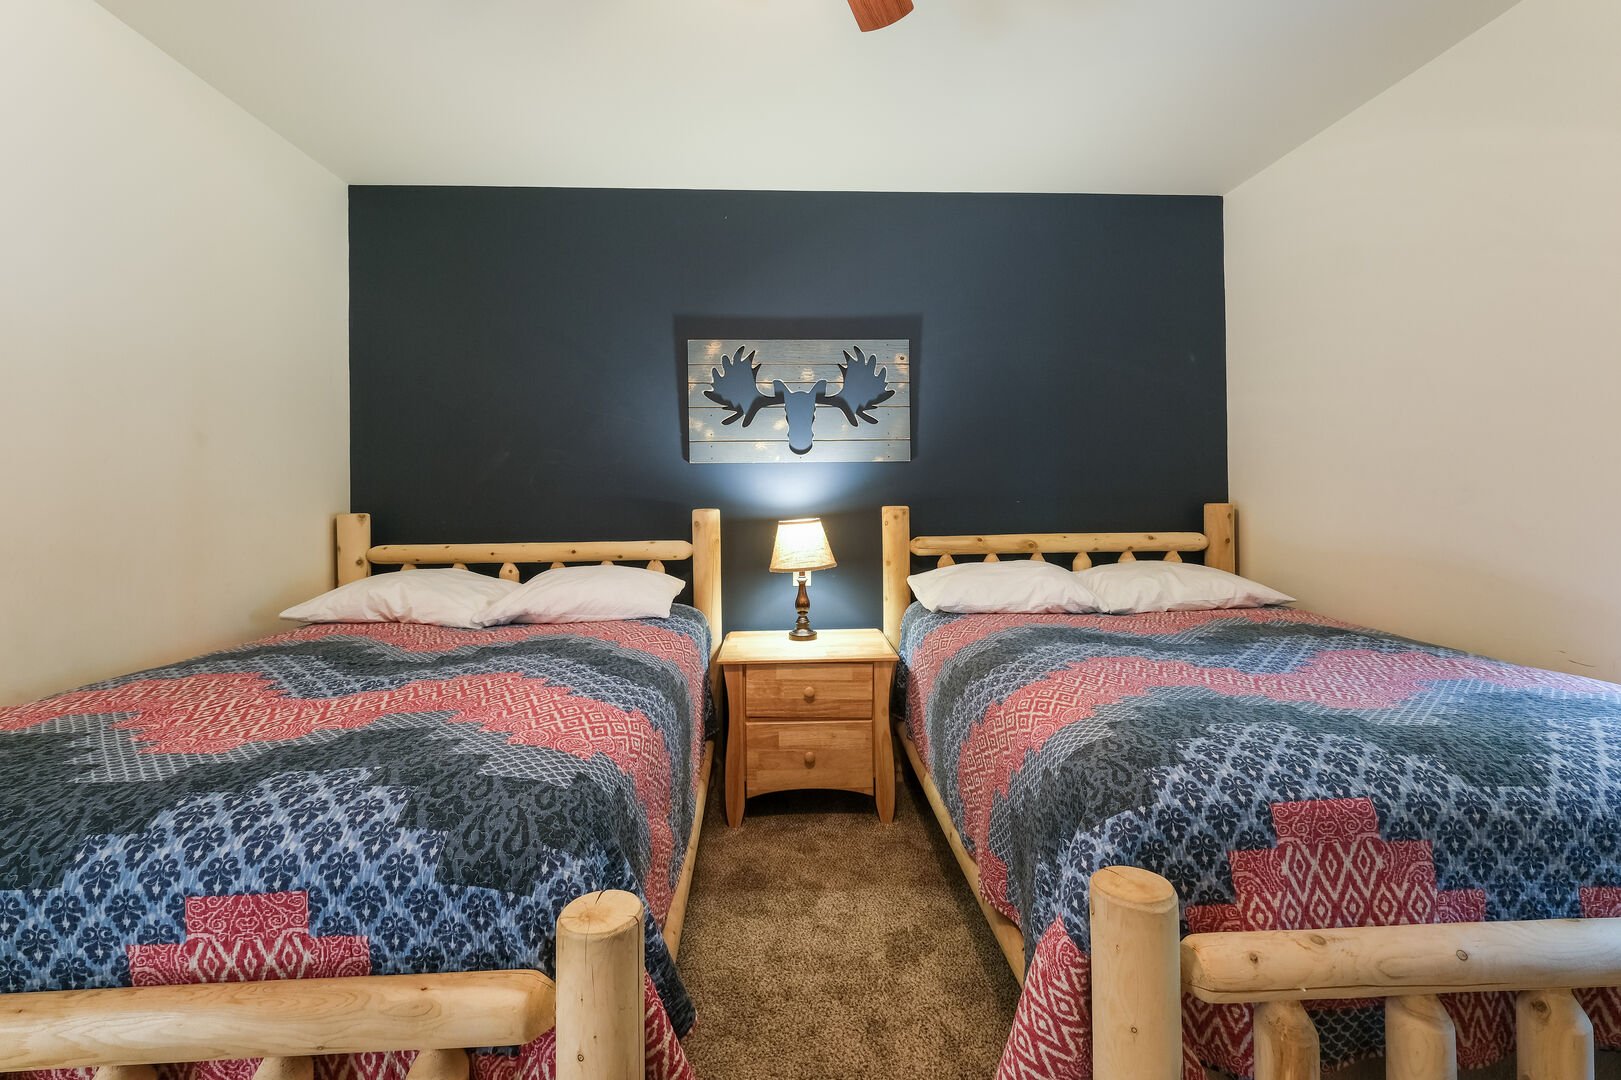 Two beds with nightstand in-between, a lamp on the nightstand shining onto a hanging moose wall decoration.